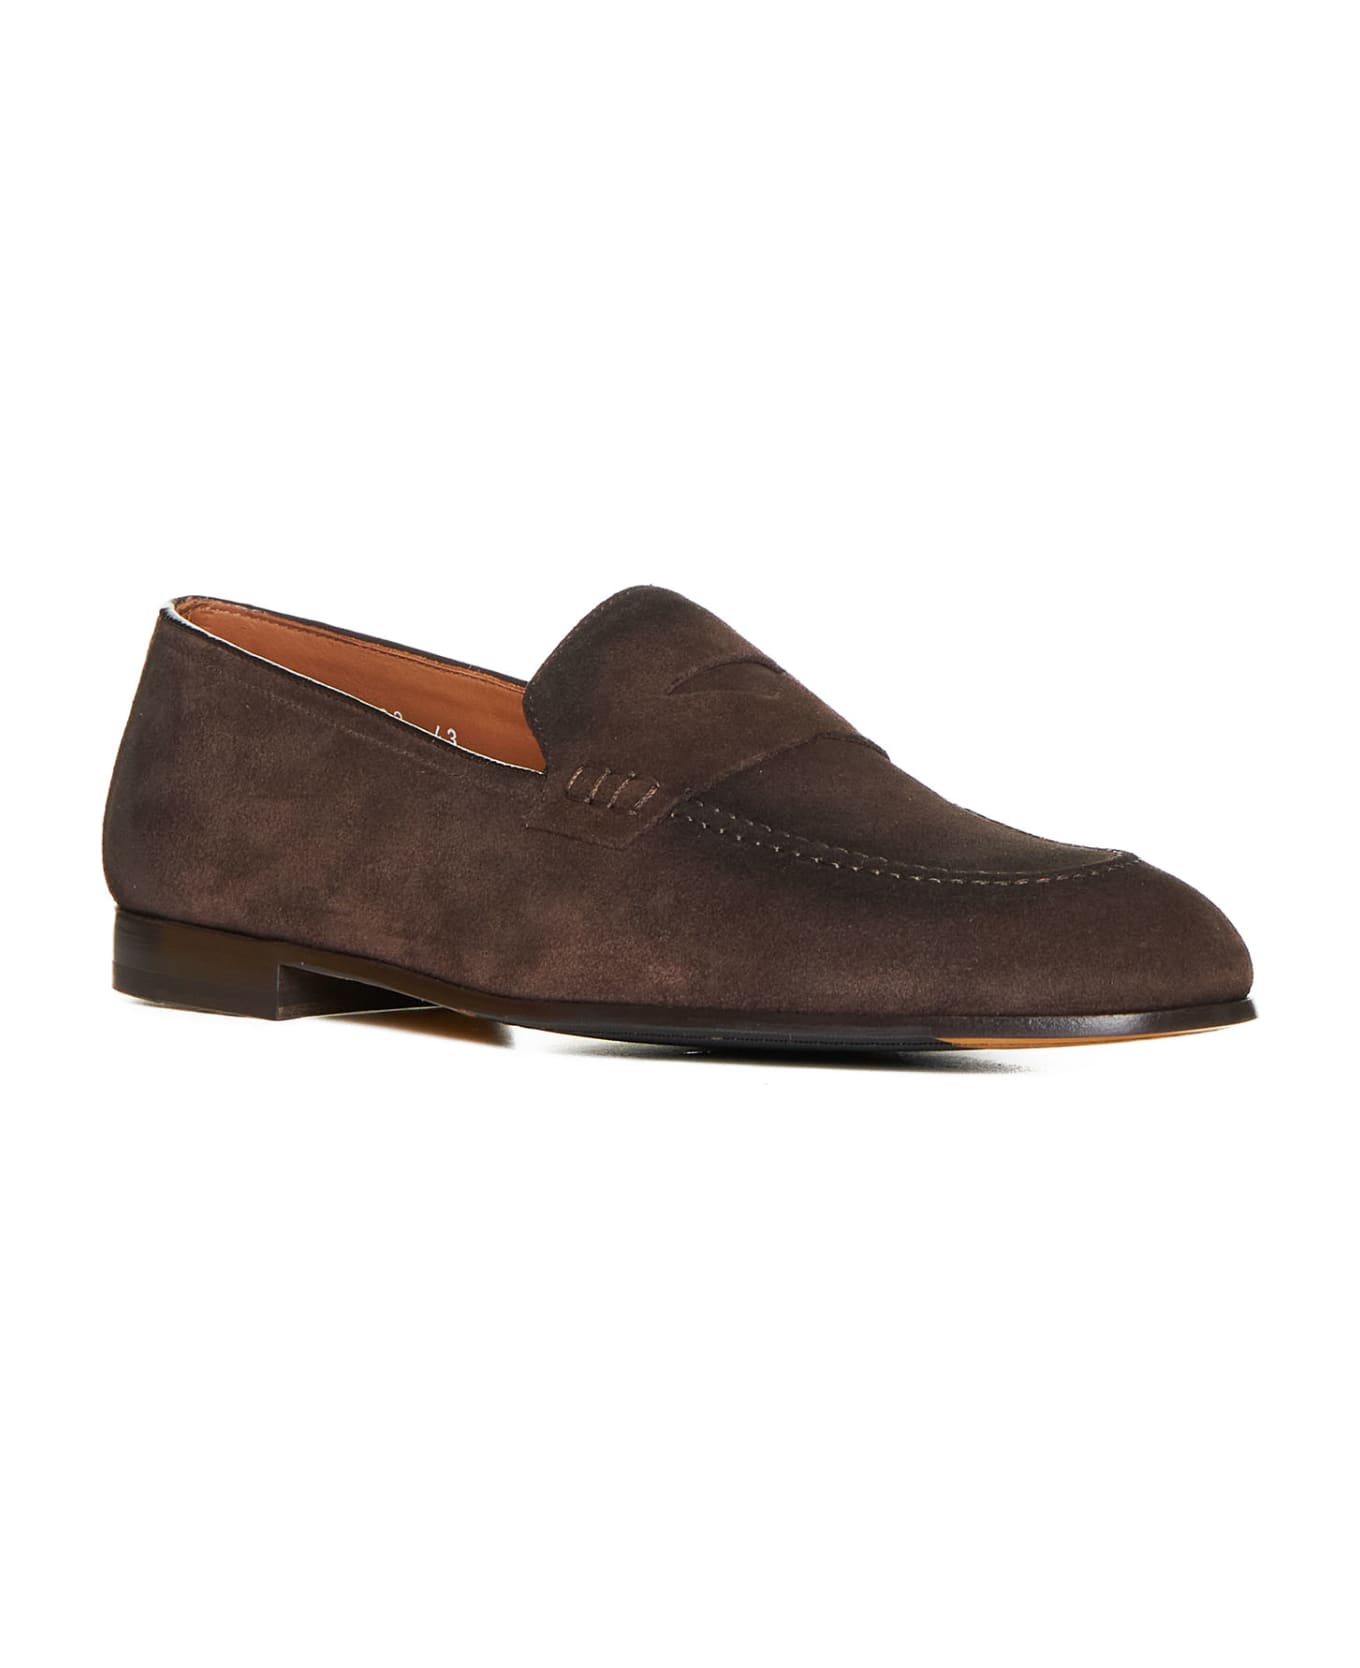 Doucal's Loafers - Terre + f.do t.moro